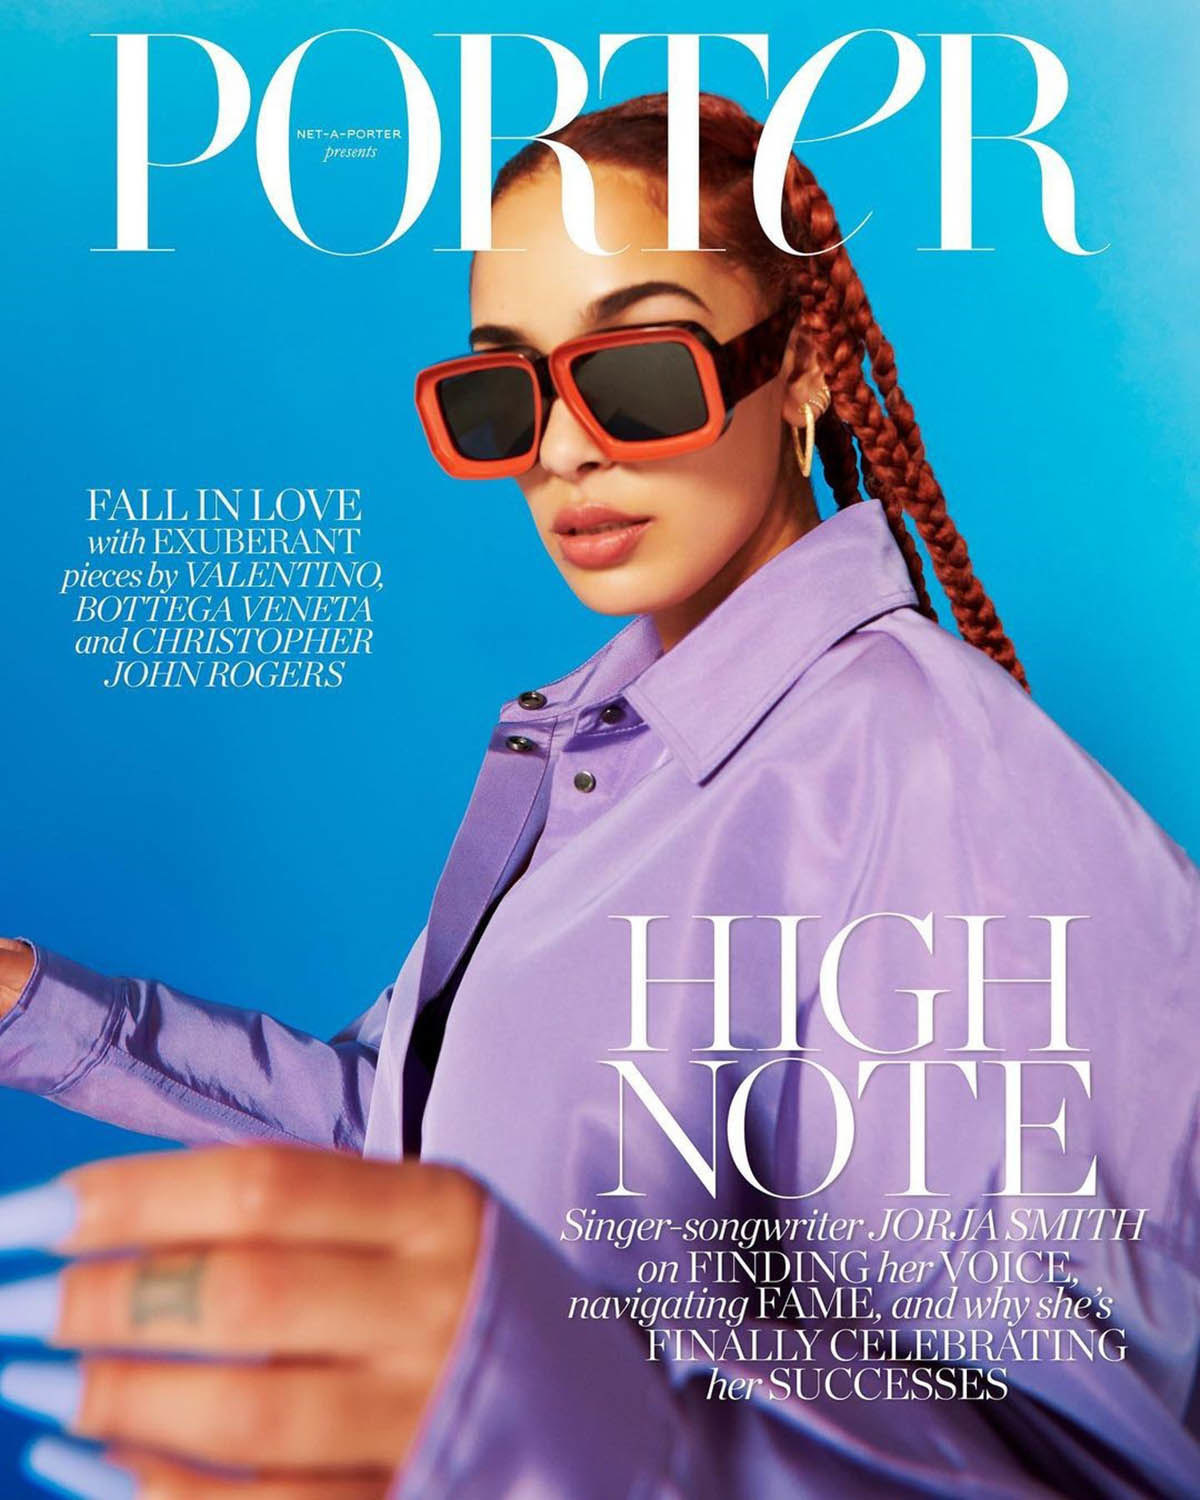 Porter Edit May 2021 Cover Story Editorial